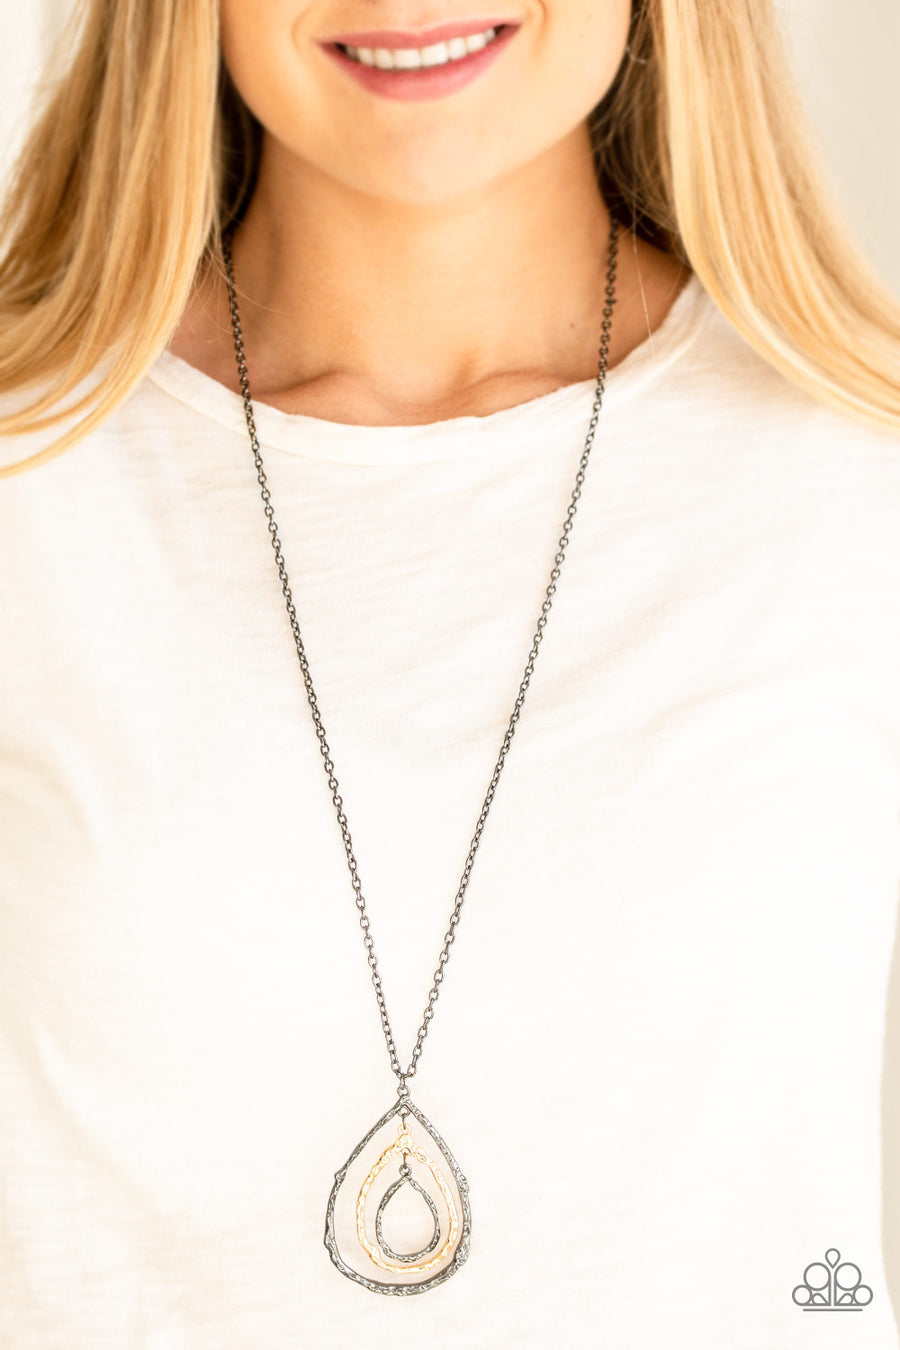 Going for Grit - Black and Gold Necklace - Paparazzi Accessories - Brushed in an antiqued shimmer, delicately hammered copper, gold, and gunmetal teardrop silhouettes swing from the bottom of a lengthened gunmetal chain for a rustic look.